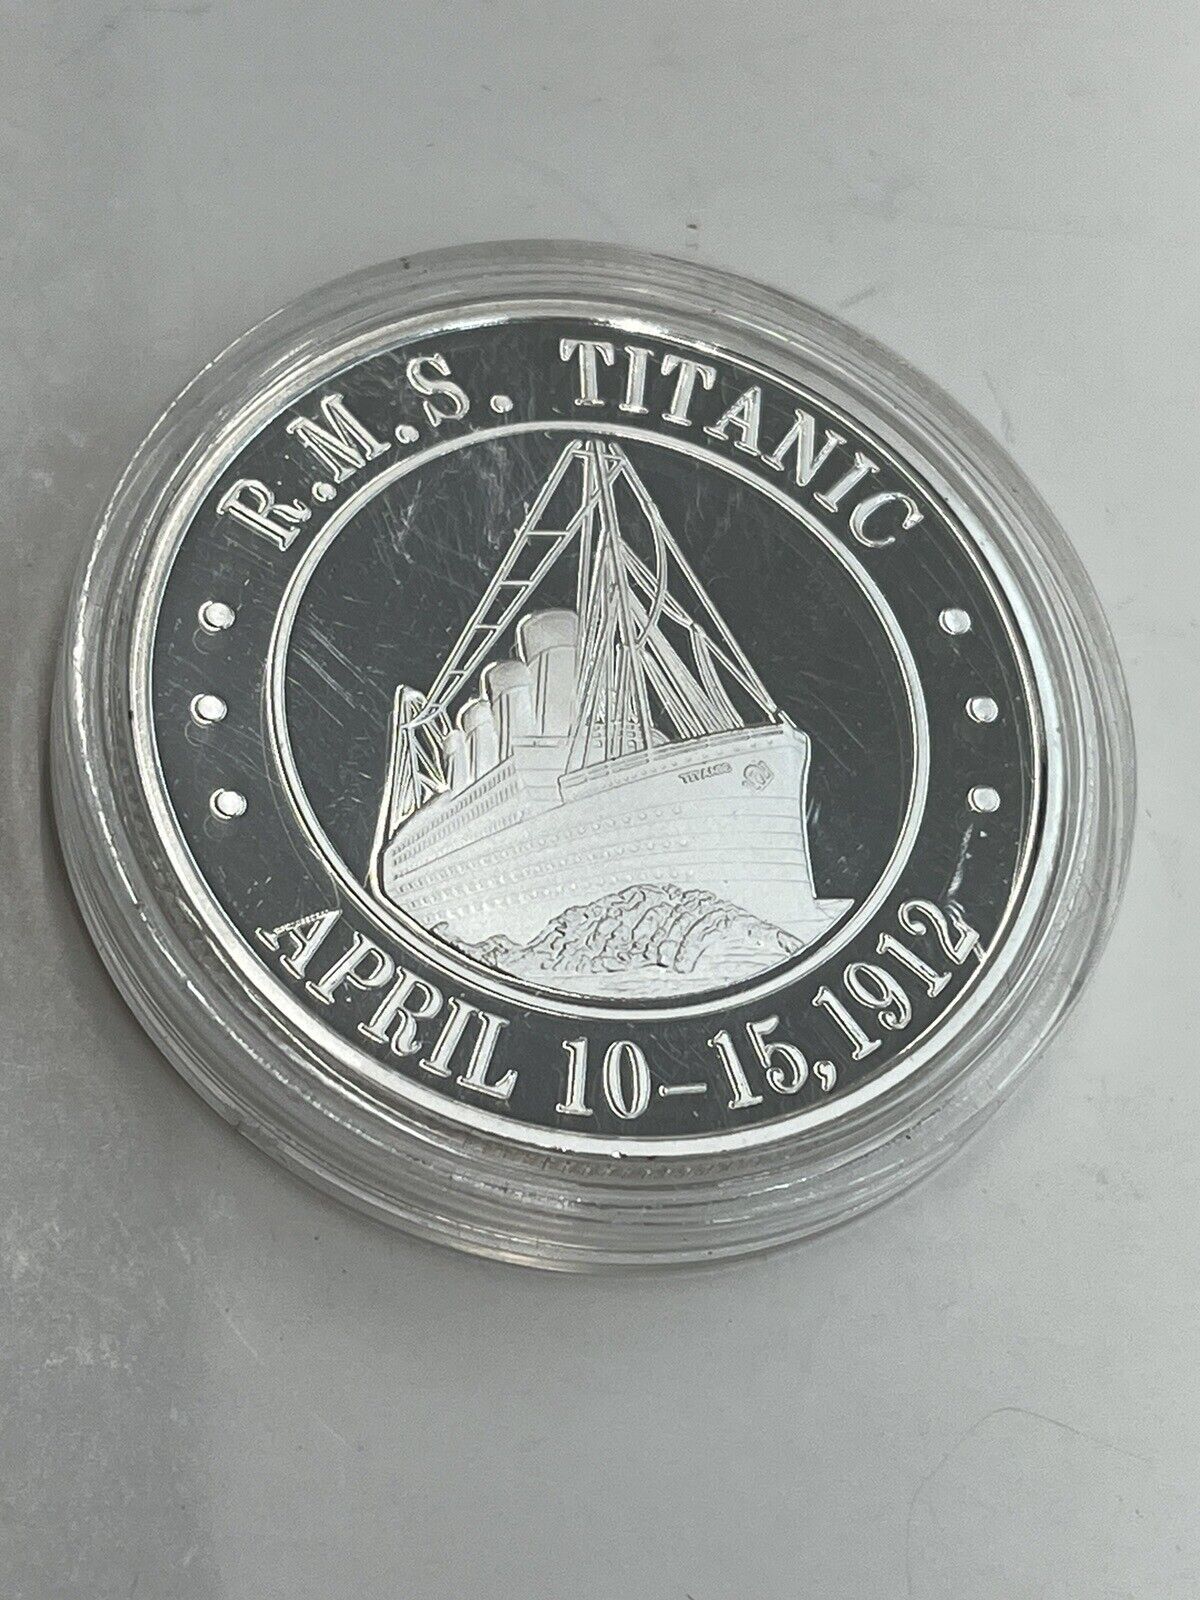 2012 RMS TITANIC WHITE STAR LINE SILVER PLATED COMMEMORATIVE COIN 